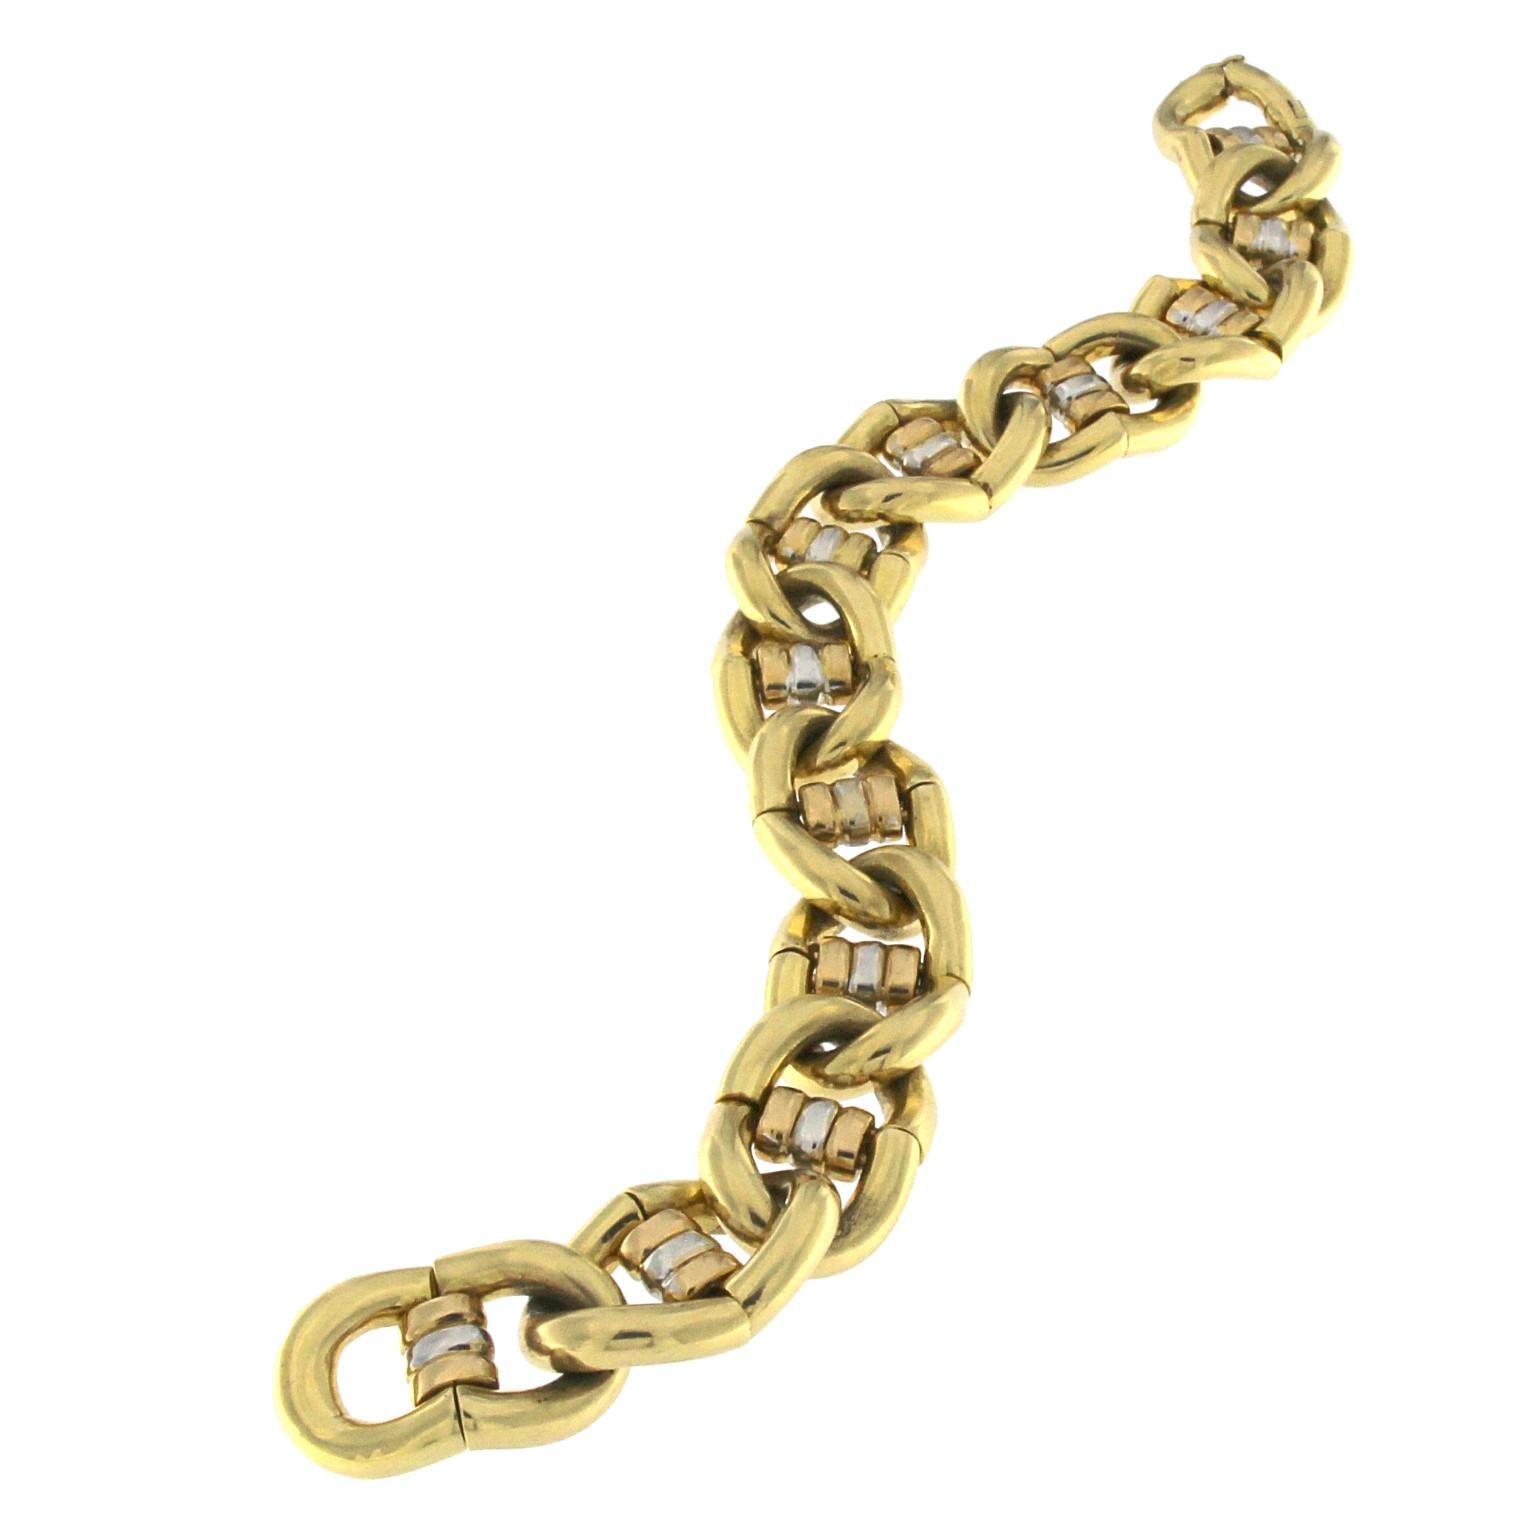 Unusual design in a style coupled chain bracelet with great visual effect in Yellow gold whit a central three color link.
Total weight of  gold 18 kt gr 58.60
Stamp 750

